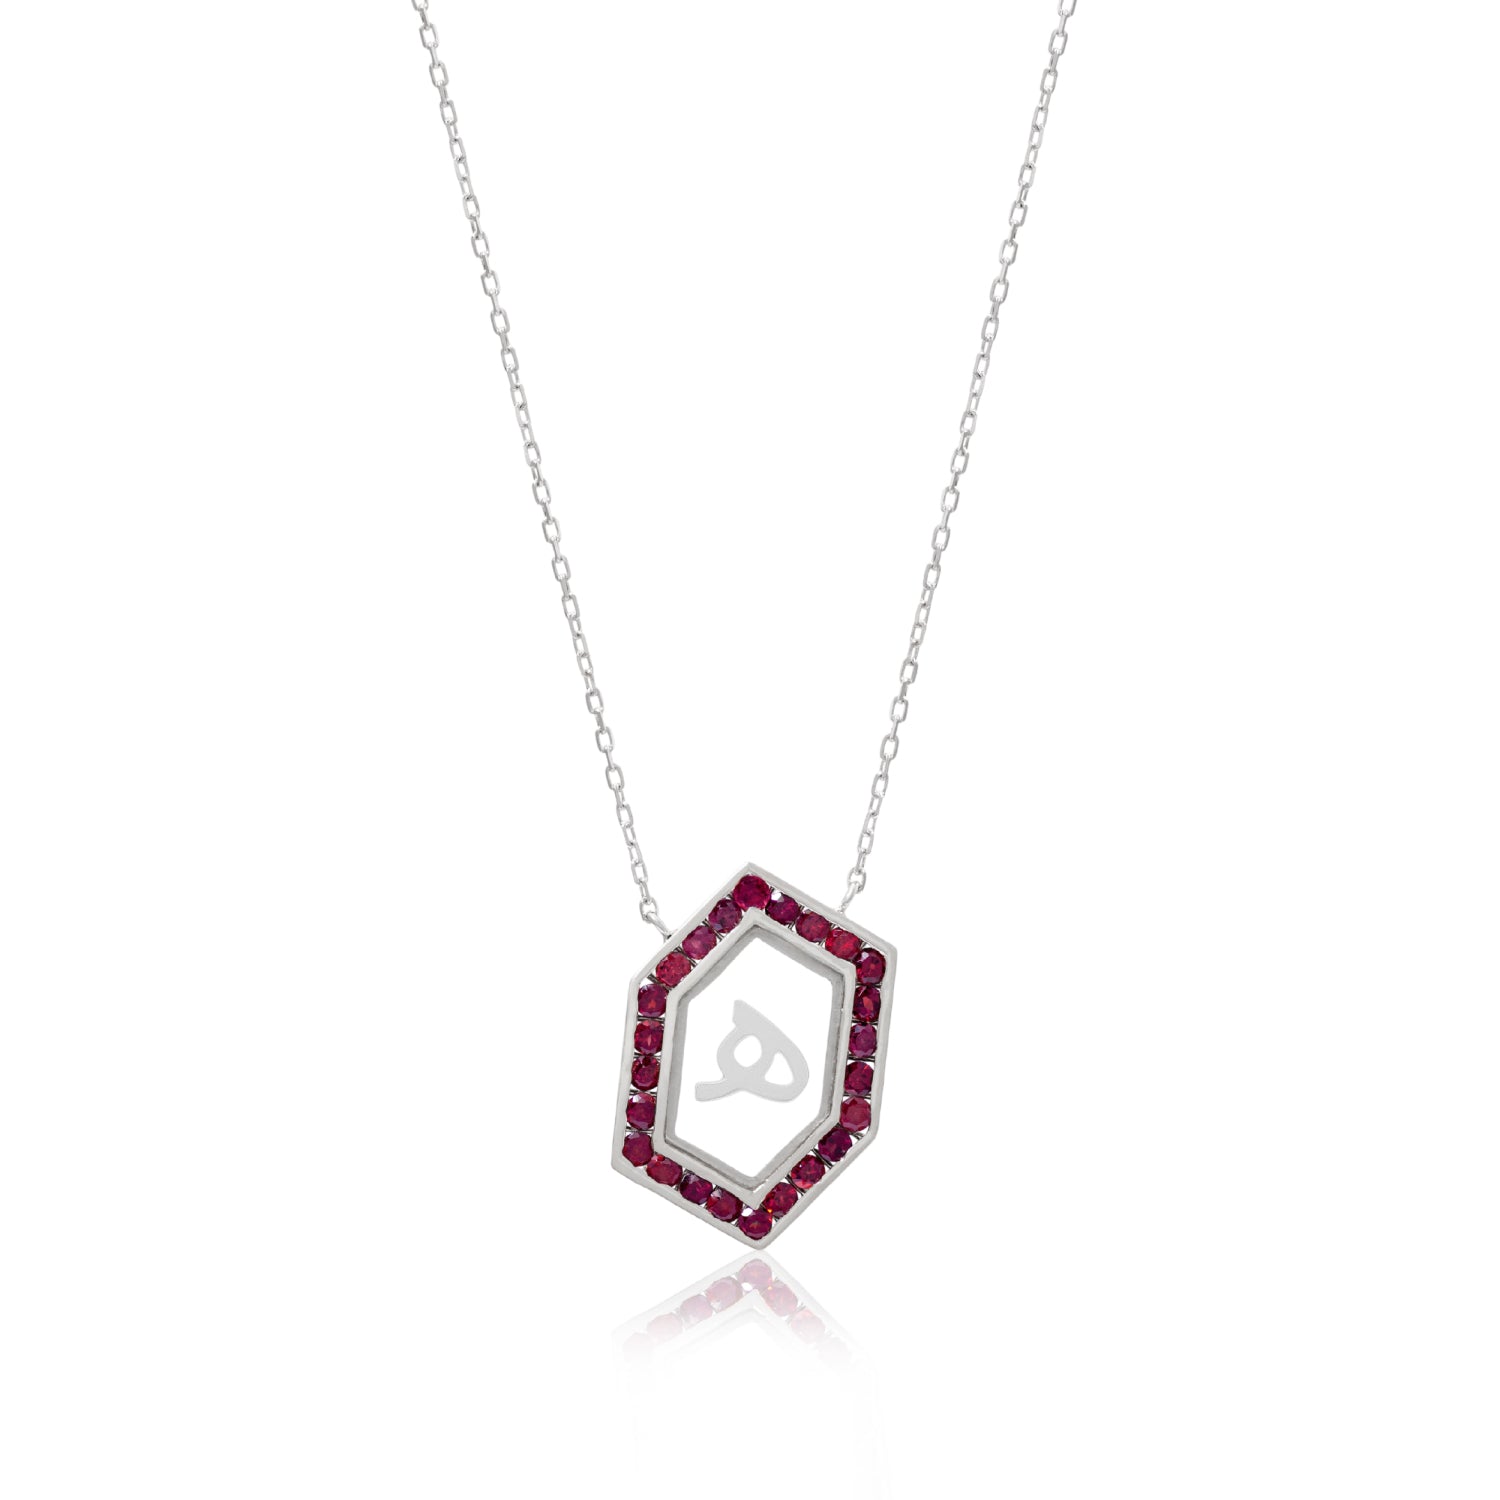 Qamoos 1.0 Letter هـ Ruby Necklace in White Gold